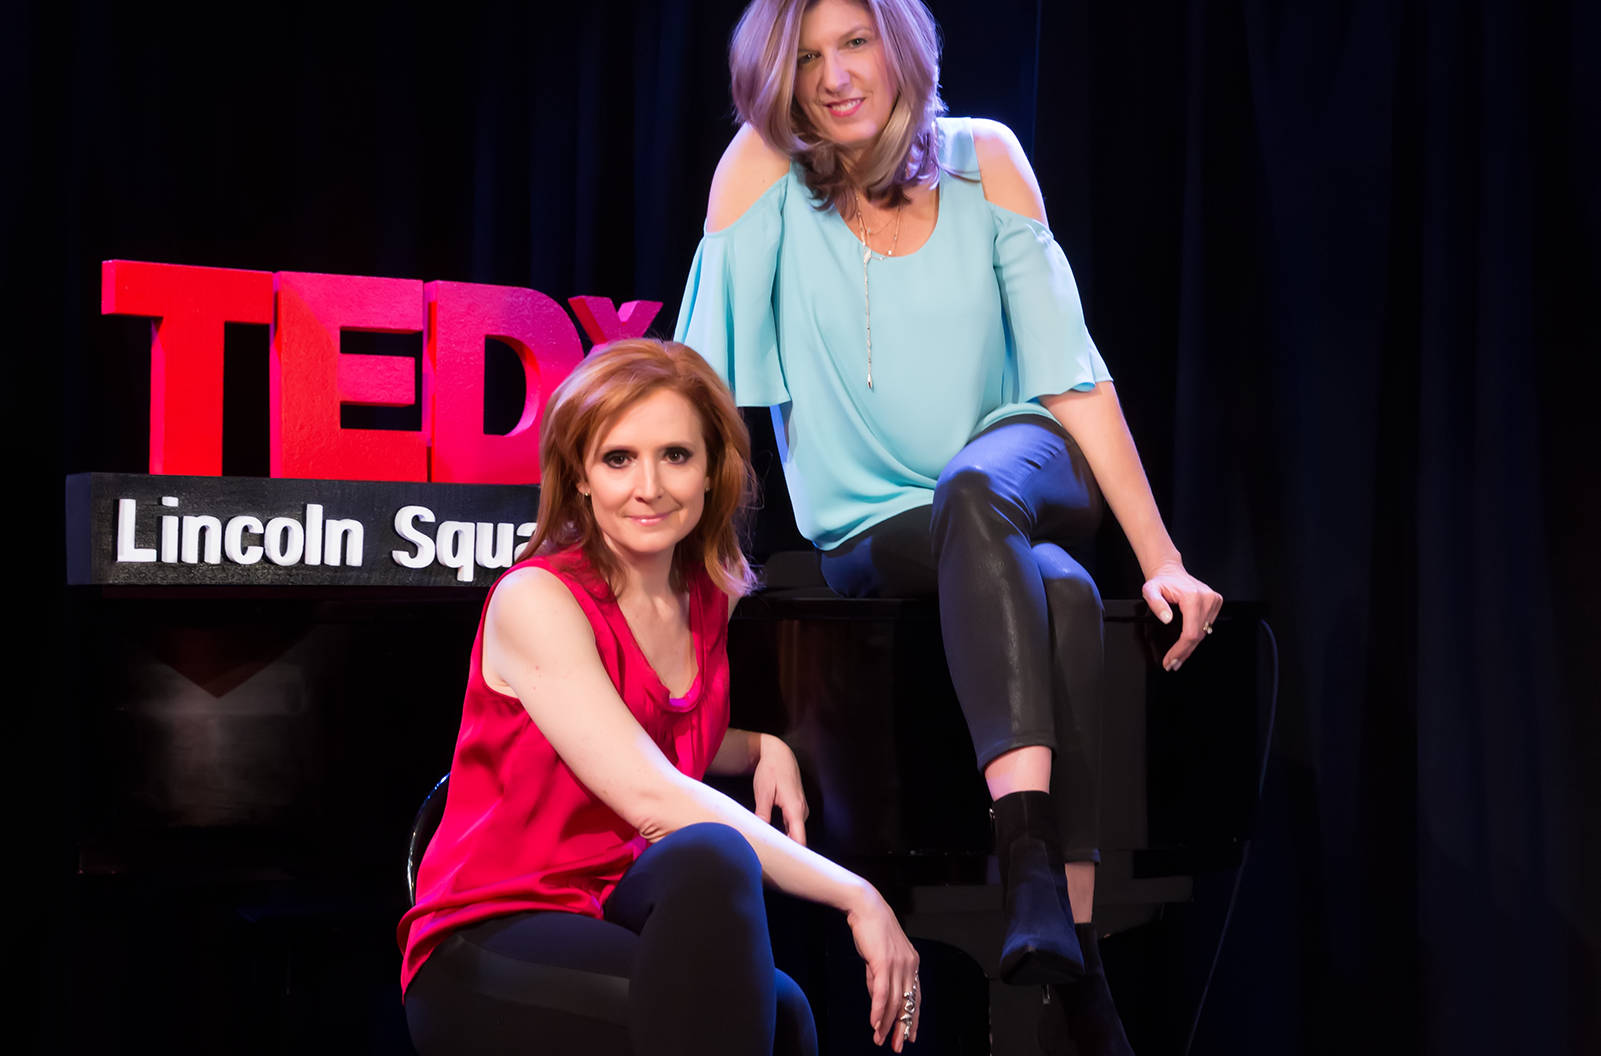 Tricia Brouk the executive producer and creative director of TEDx Lincoln Square sitting on the TEDx Lincoln Square stage with co-producer Jamie Broderick